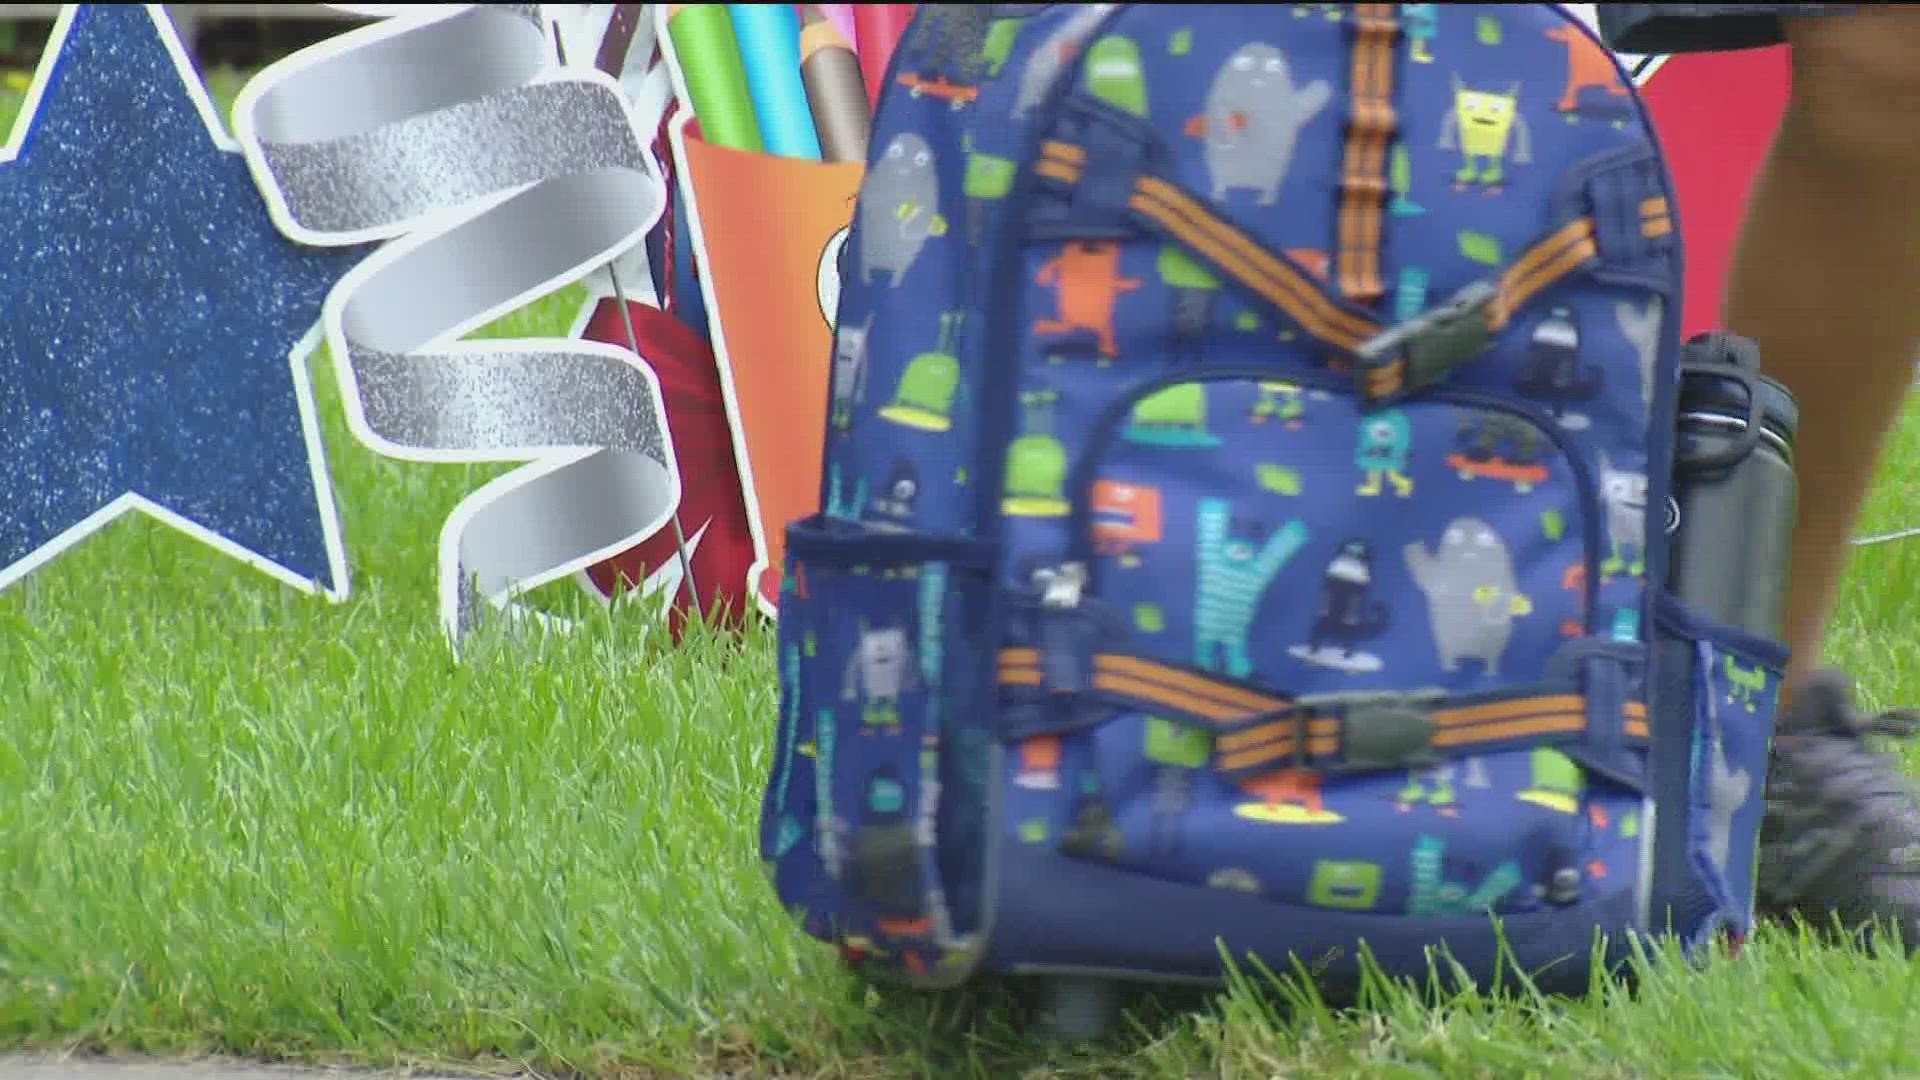 It's back to school for many South Bay students on a year-round schedule. It's also the first day for the new state-mandated start times for high schools.